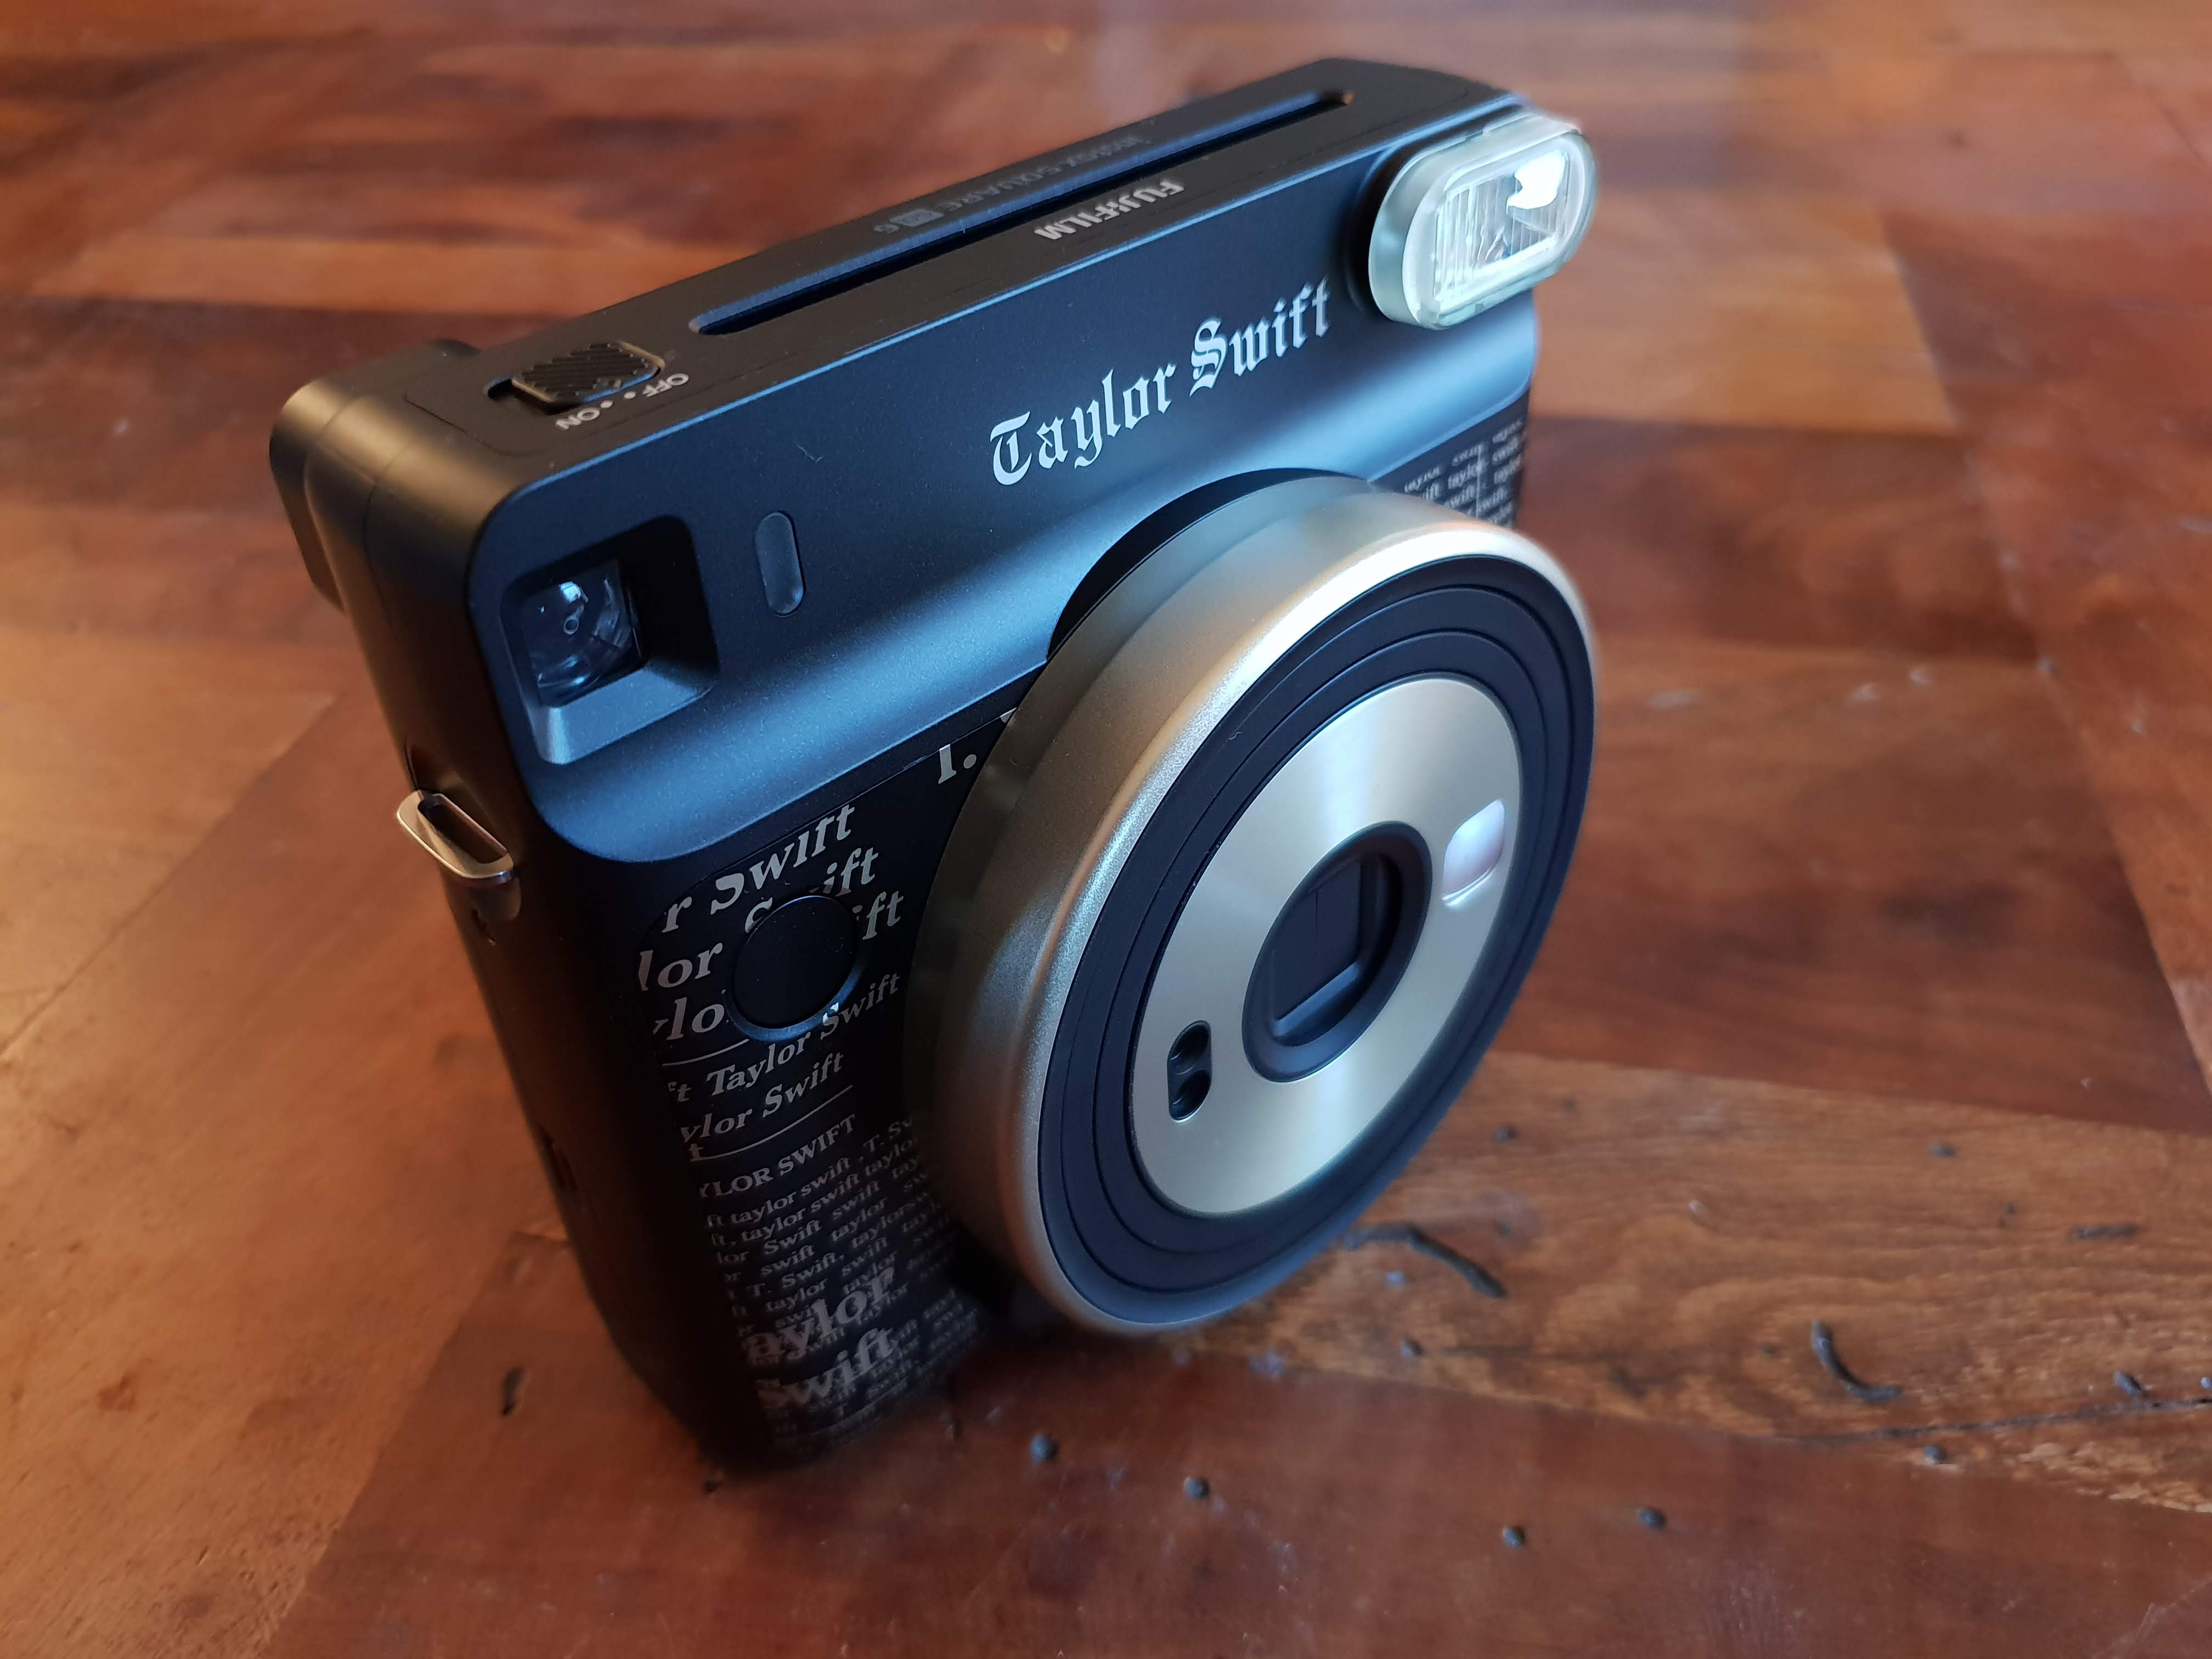 verachten houten druiven Fujifilm Instax Square SQ6 Taylor Swift Edition Review | Trusted Reviews